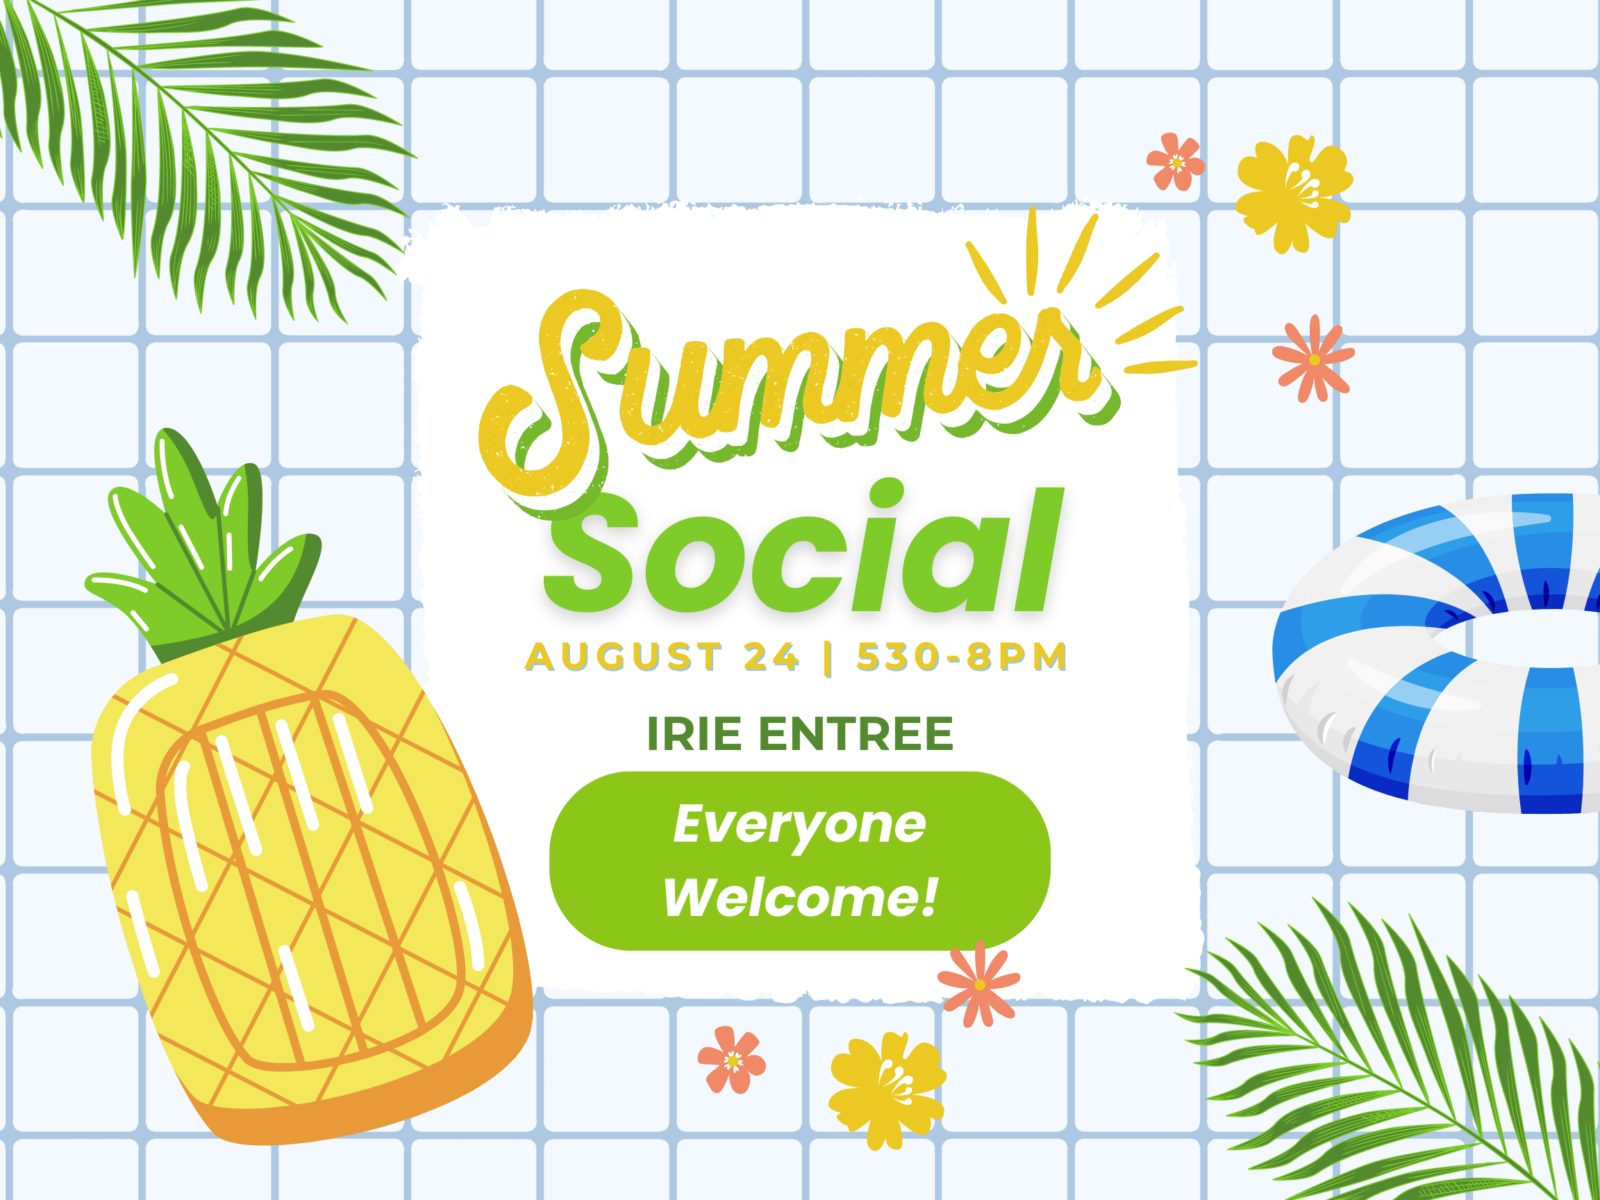 Summer Social: August 24, 5:30pm - 8pm at Irie Entree. Everyone welcome!